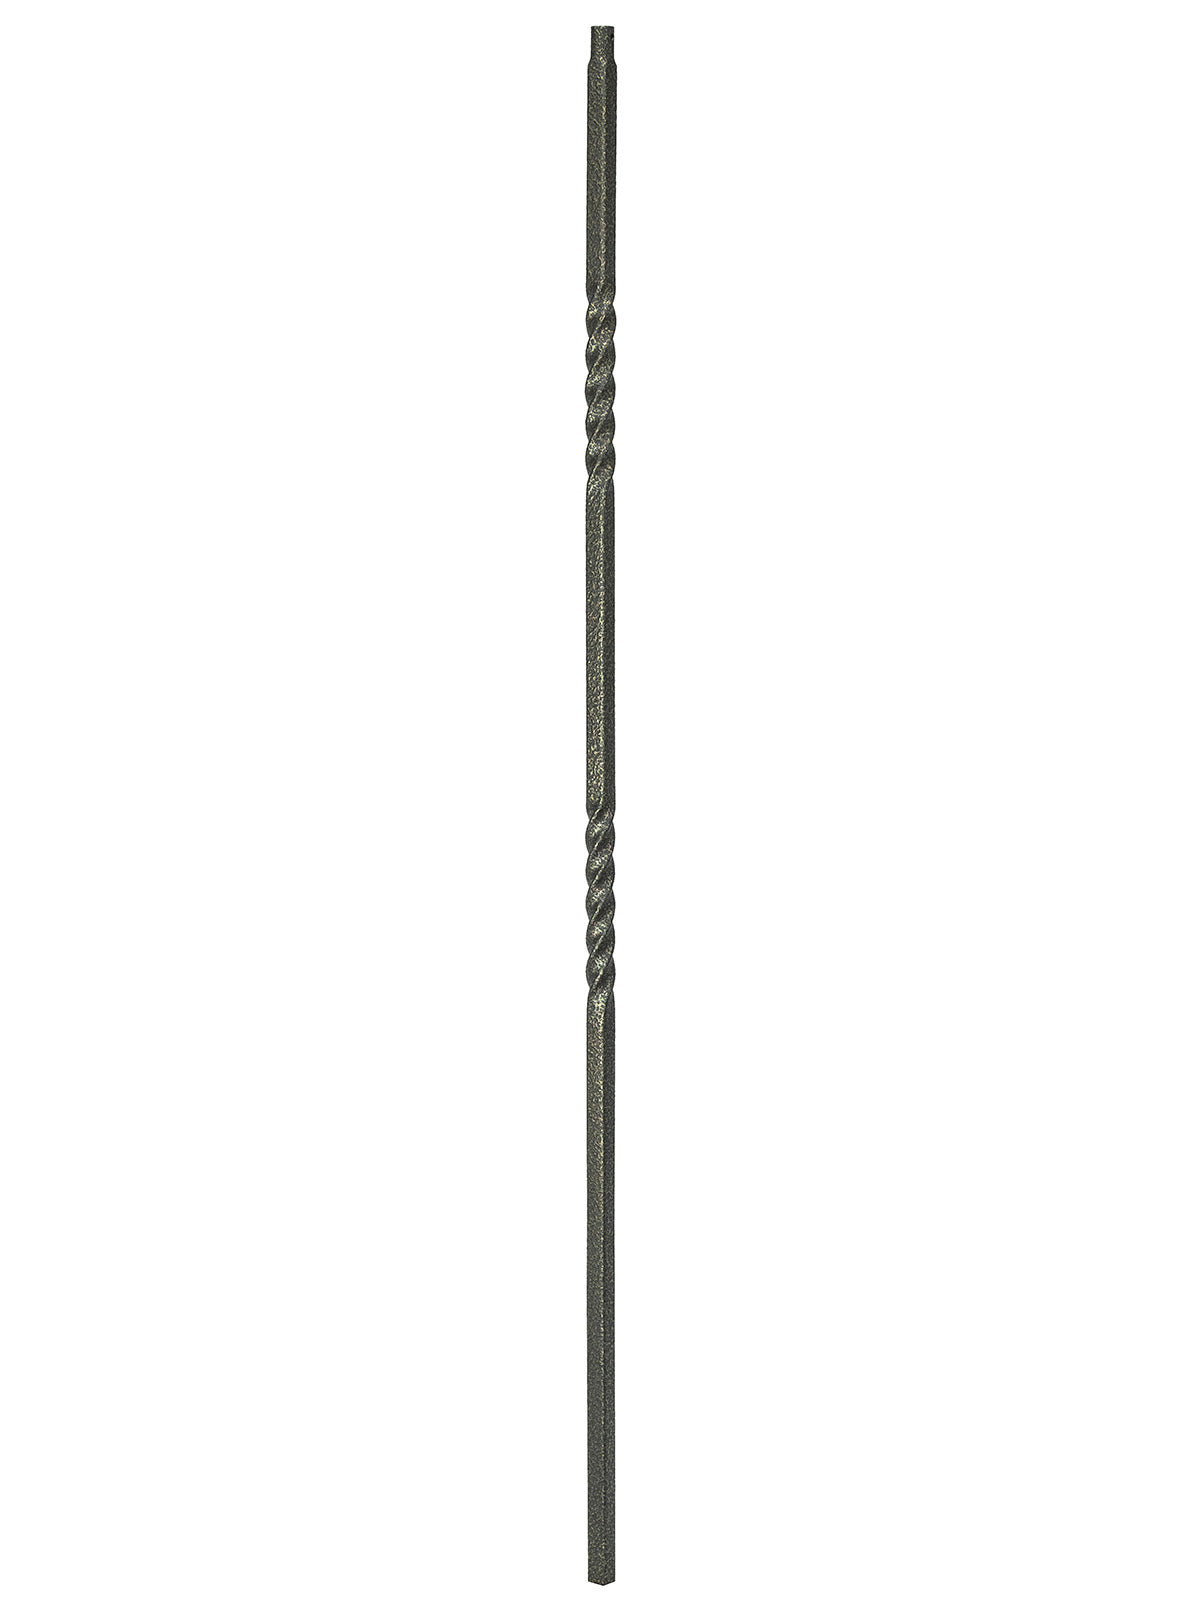 Iron Baluster 2G03 - 5/8" Square - Double Twist